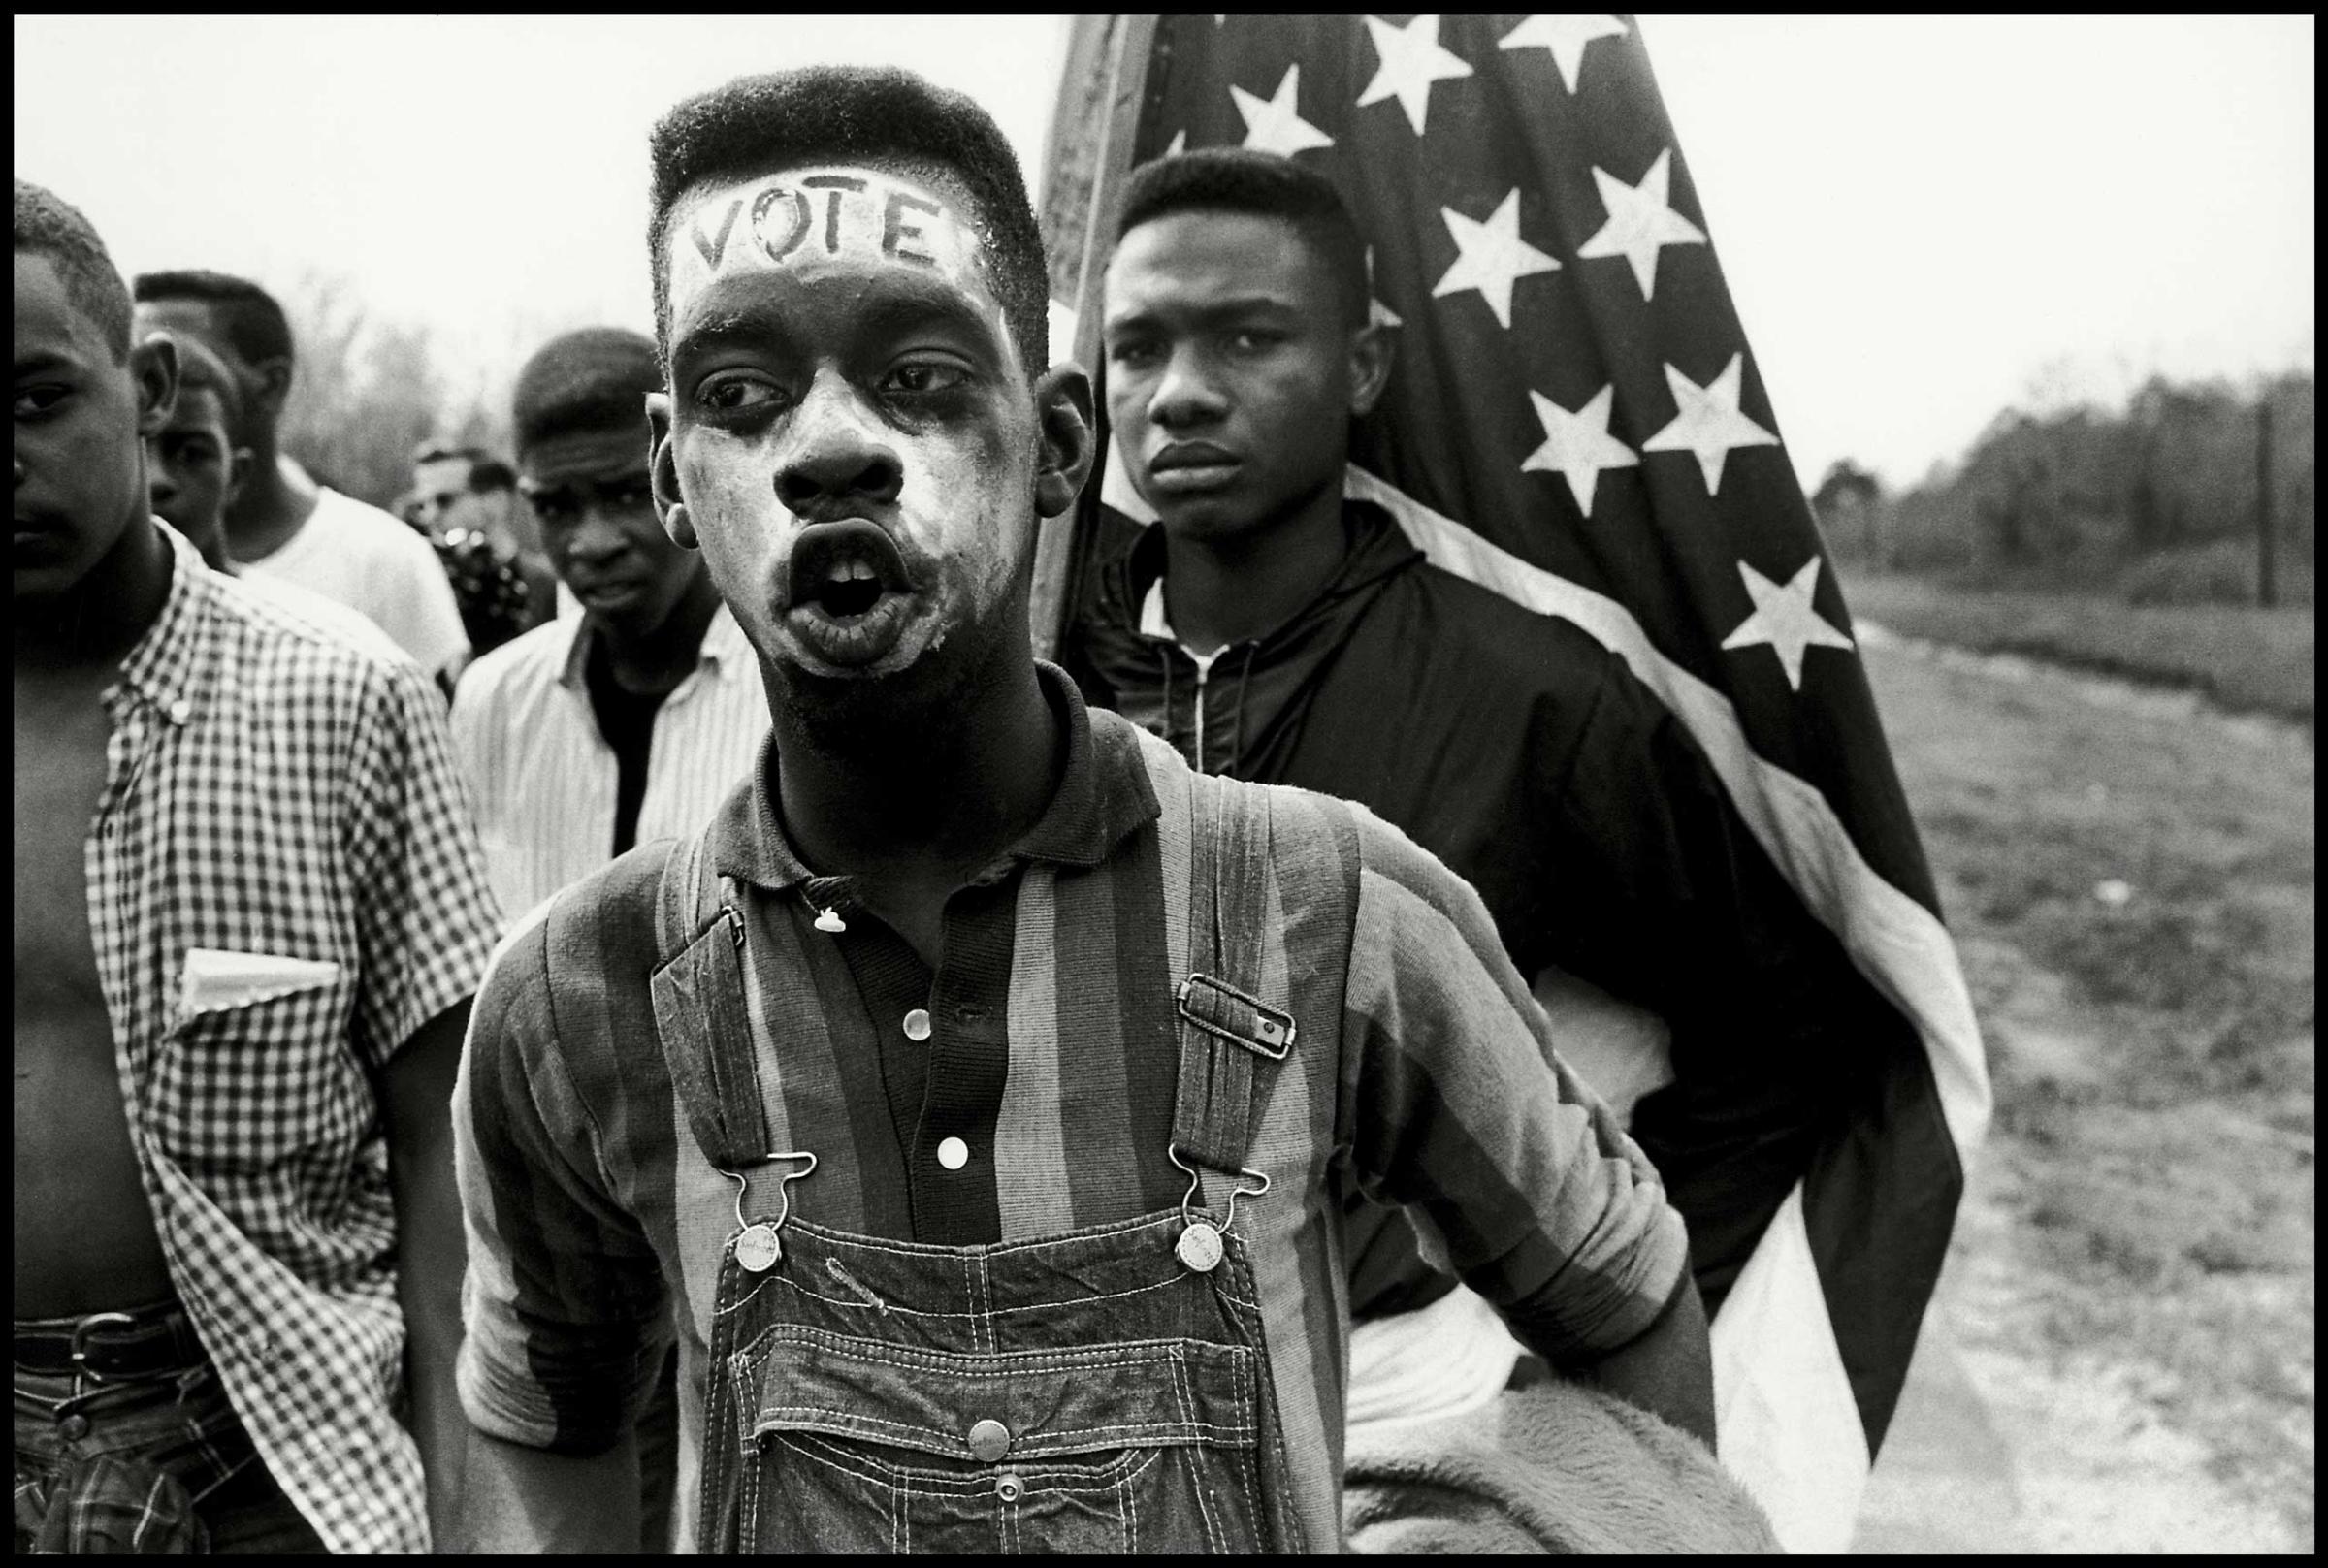 USA. Alabama. 1965. Led by Martin Luther King Jr., a group of civil rights demonstrators march from Selma to Montgomery to fight for black suffrage. A young African American man with the word "VOTE" on his forehead.